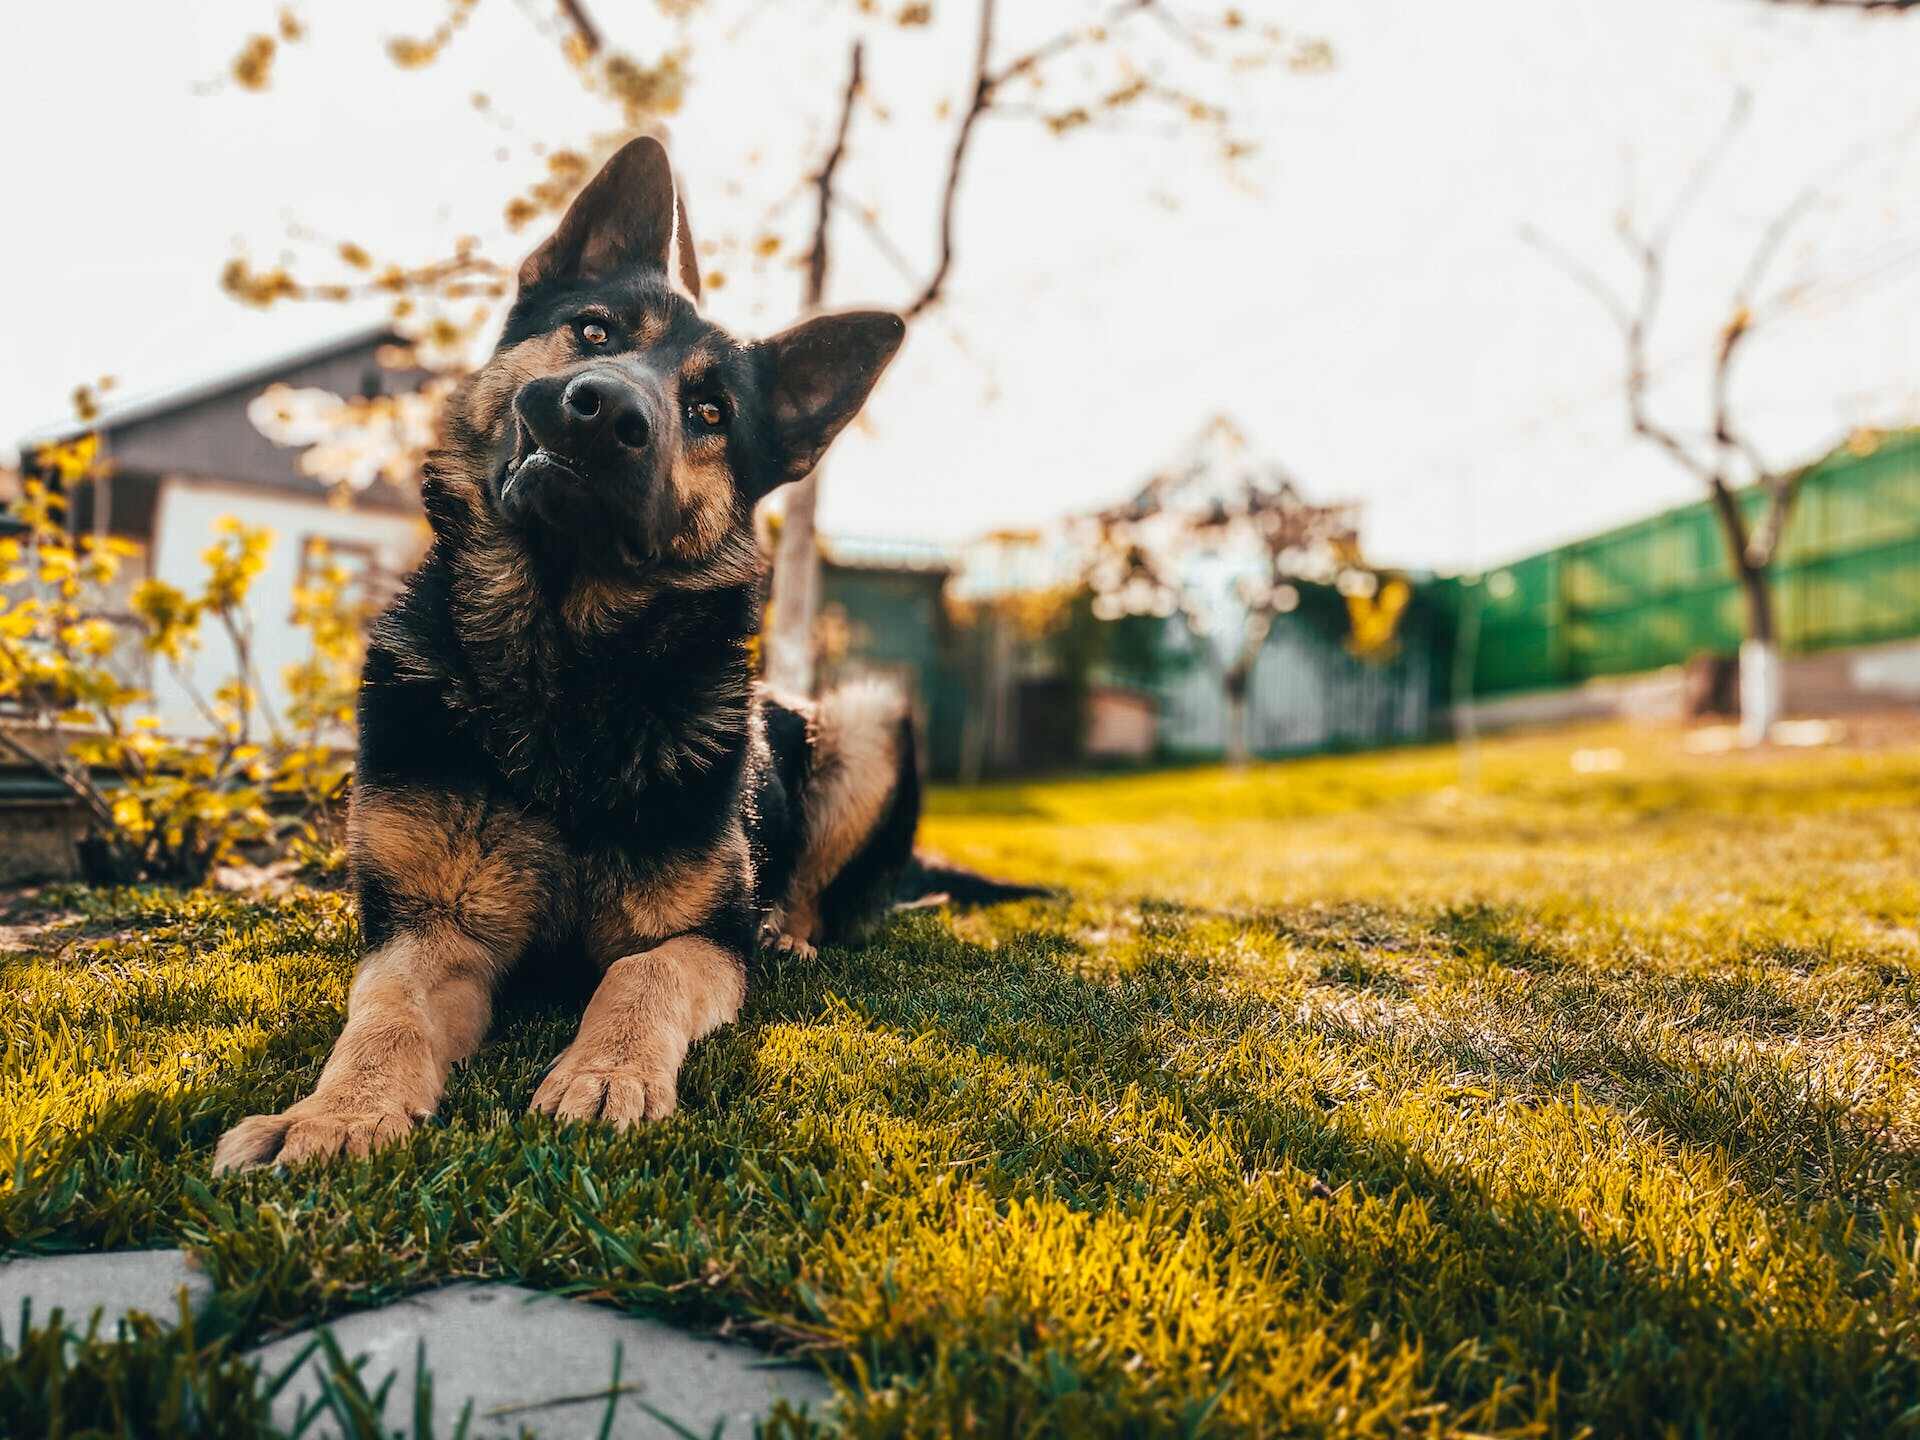 A German Shepherd puppy sitting in a shaded part of a lawn